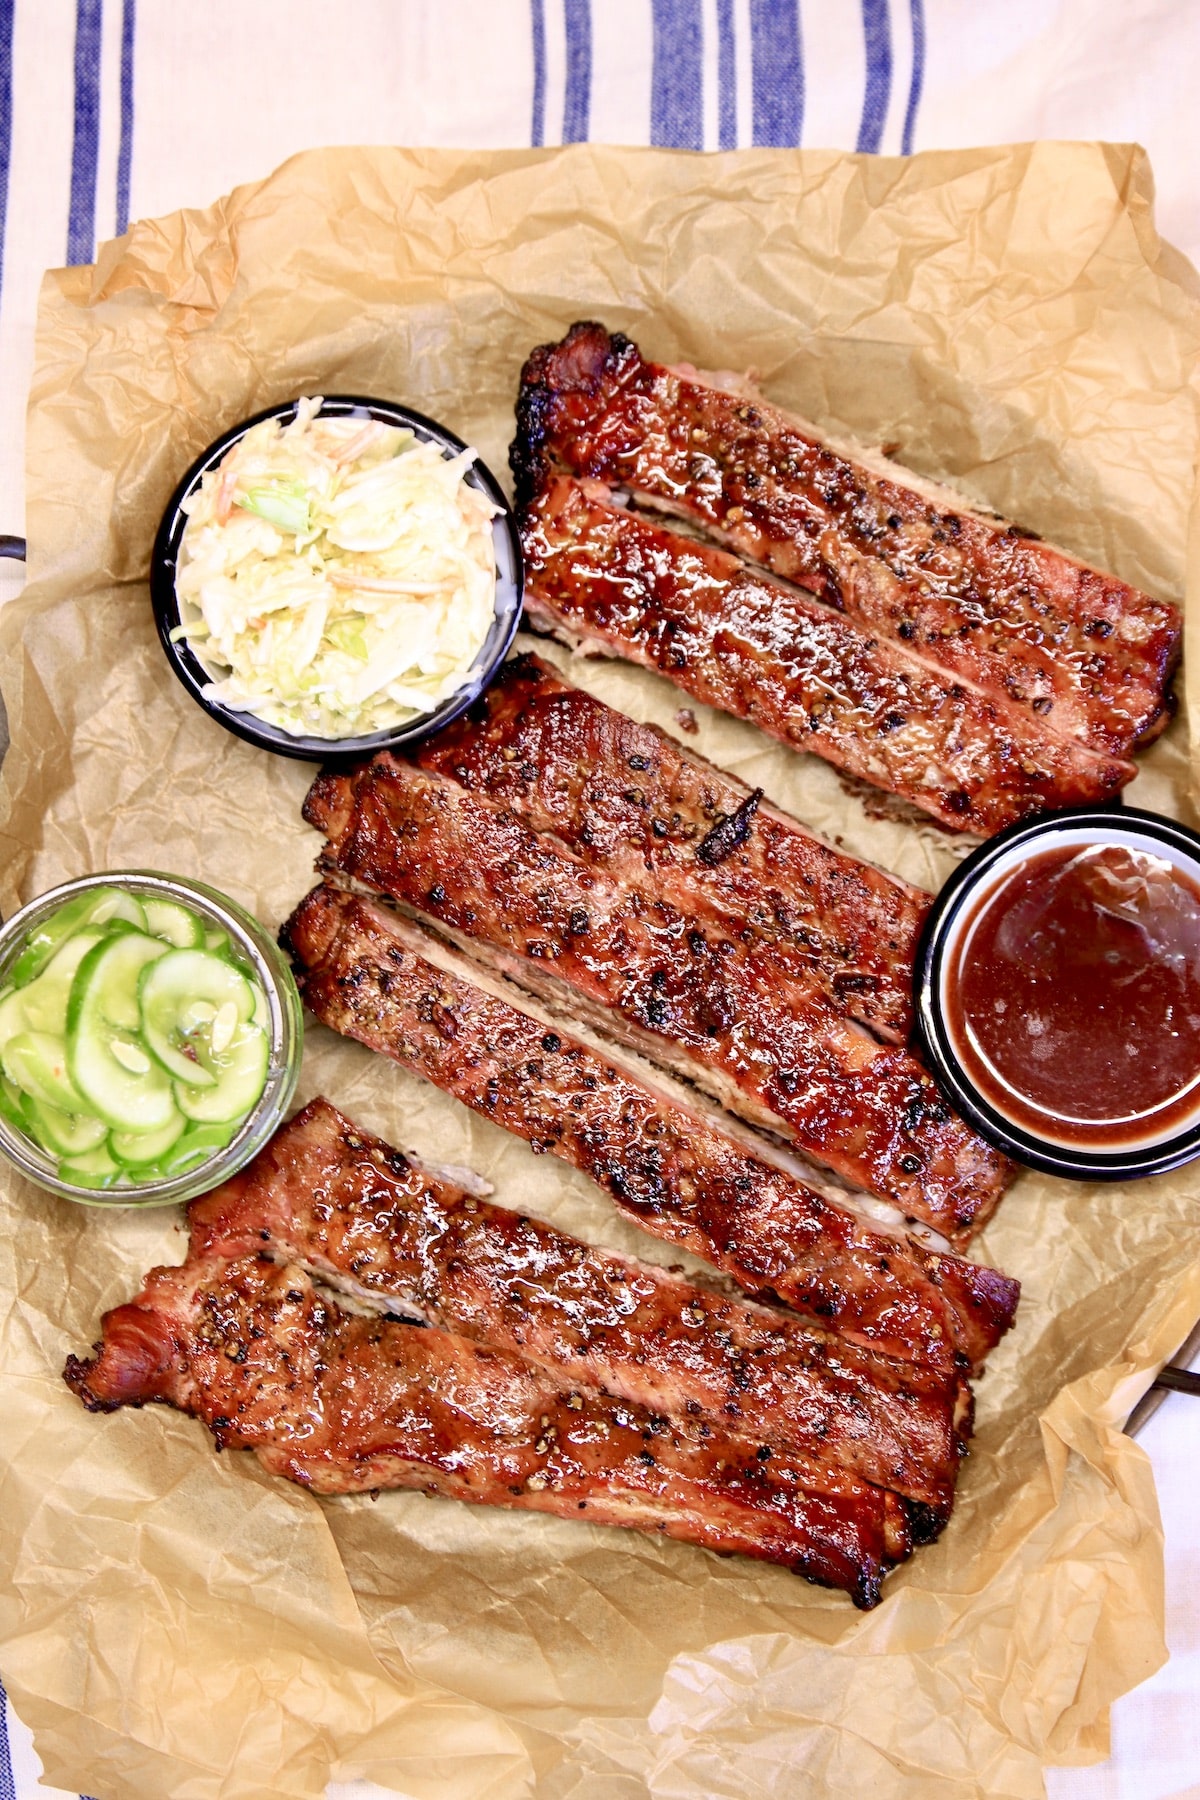 Platter of spare ribs with bowls of slaw, pickles